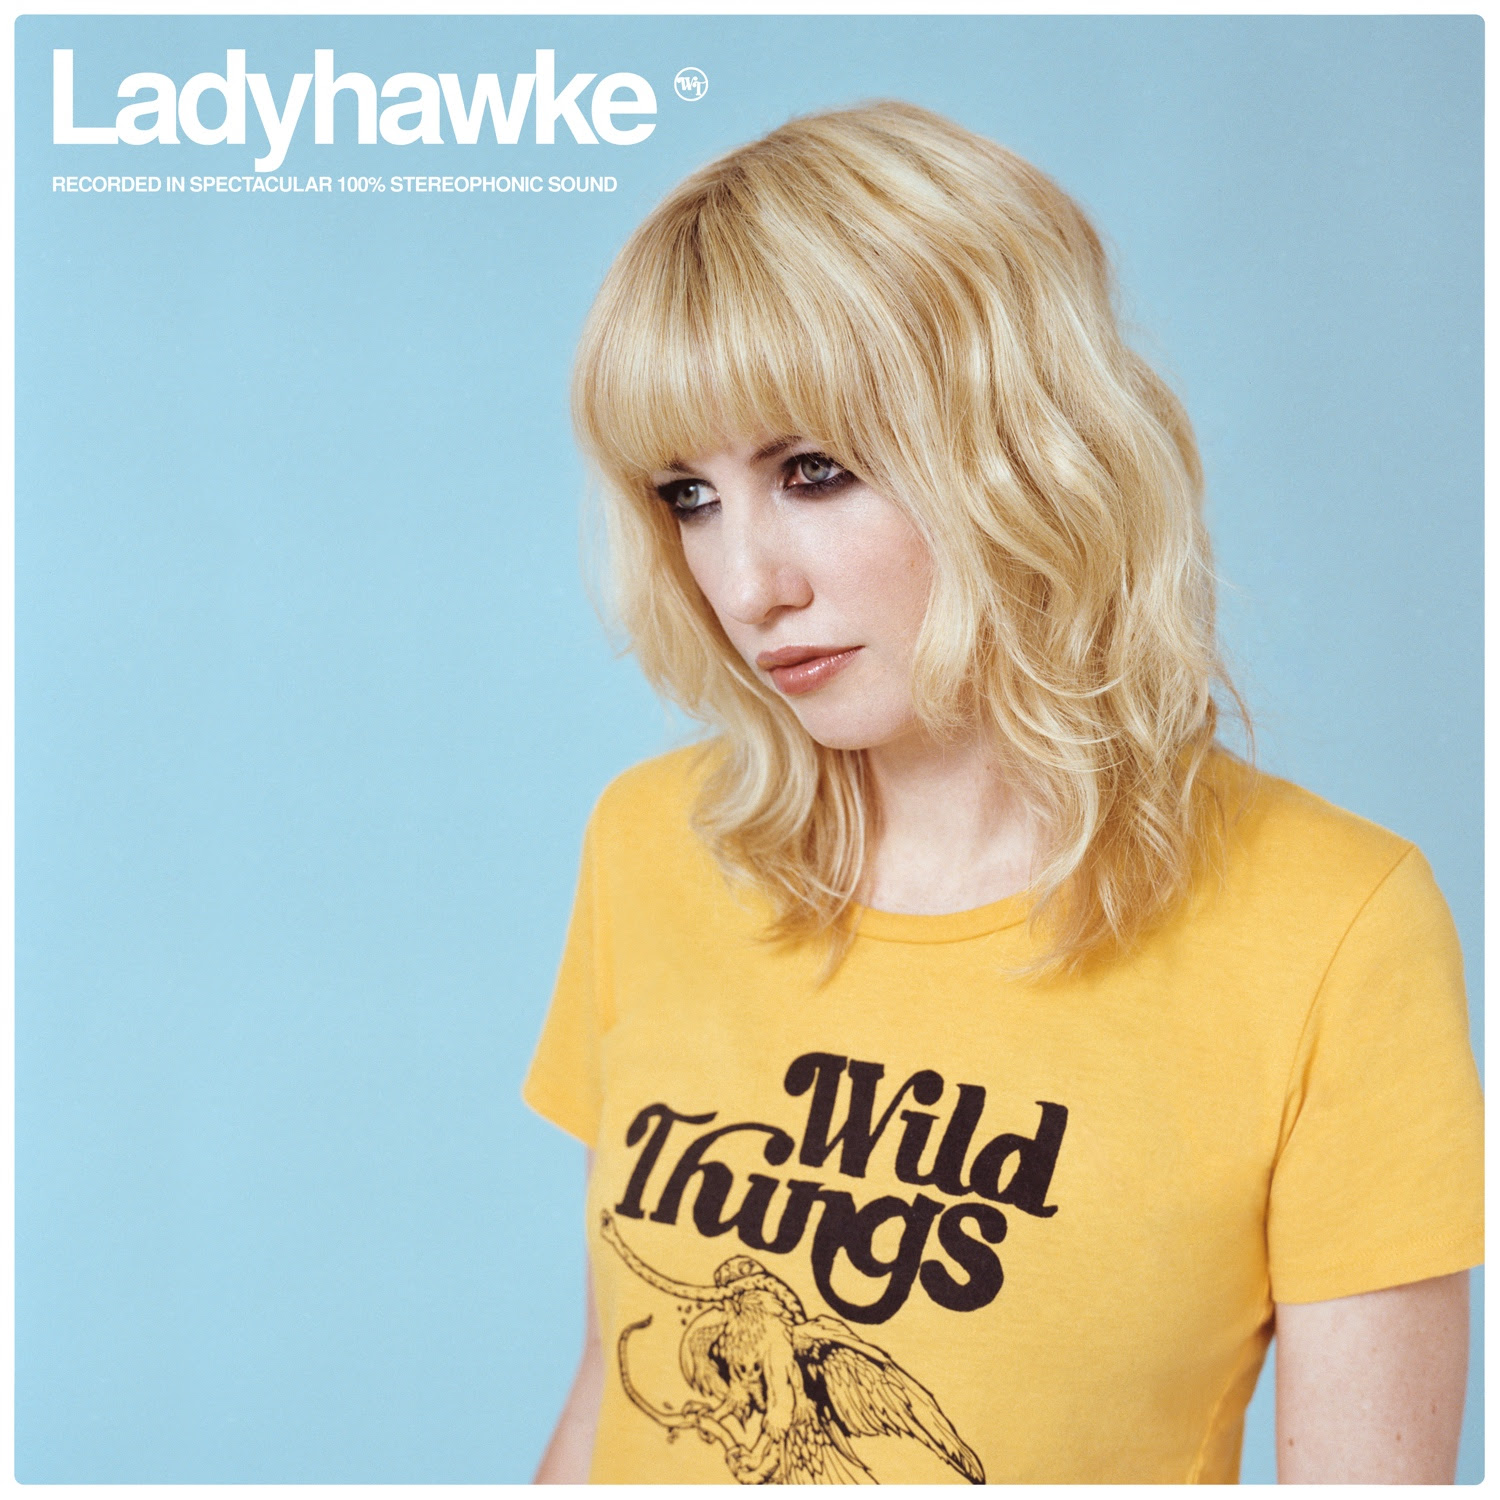 Ladyhawke 3rd Studio LP 'Wild Things' Out June 3rd via Polyvinyl Records